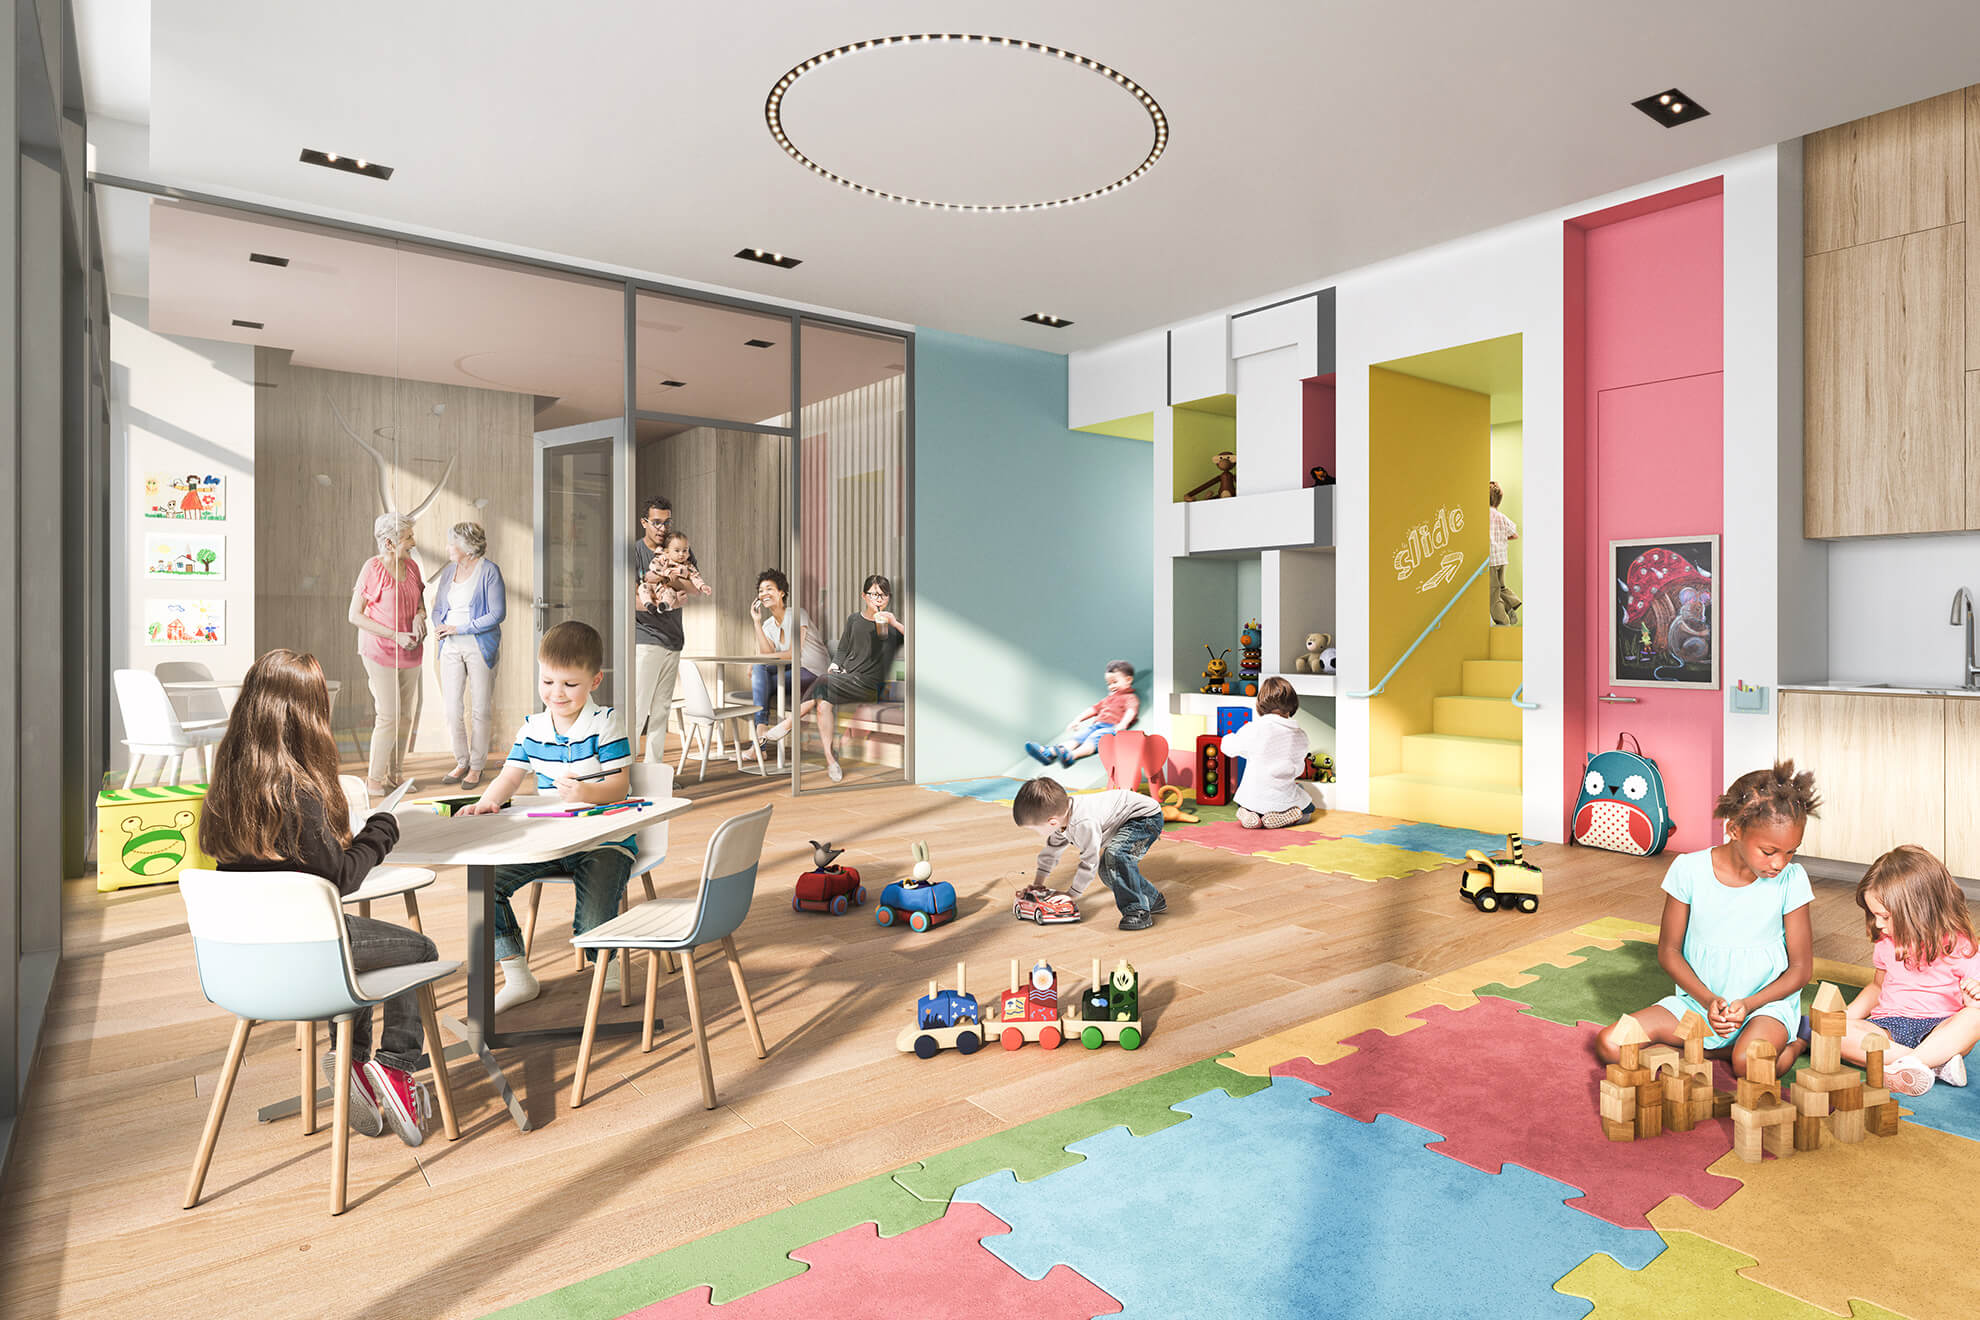 Wesley Tower Child Centre Rendering - kids playing in the room while parent look on